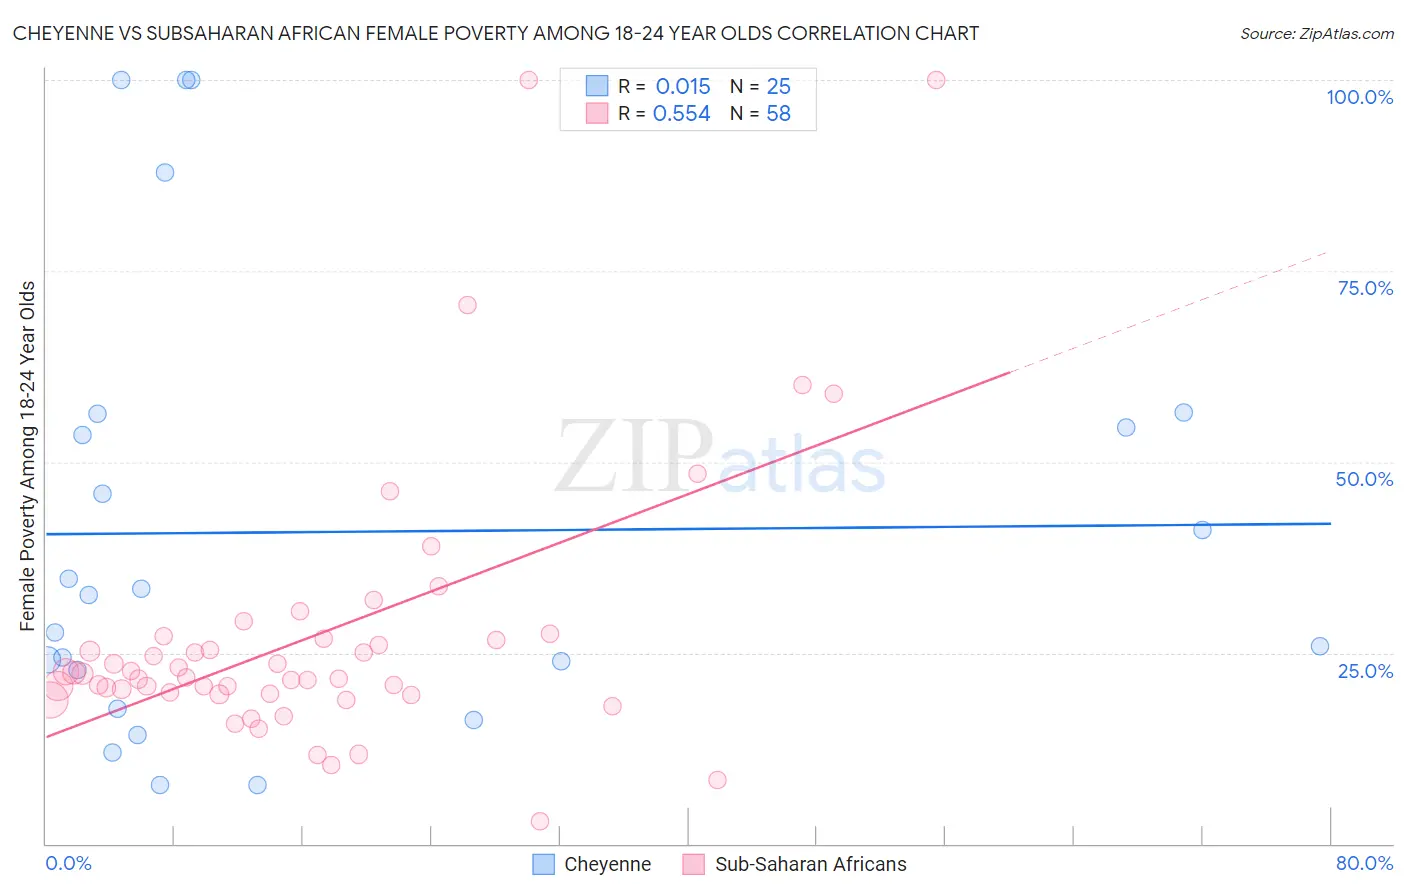 Cheyenne vs Subsaharan African Female Poverty Among 18-24 Year Olds